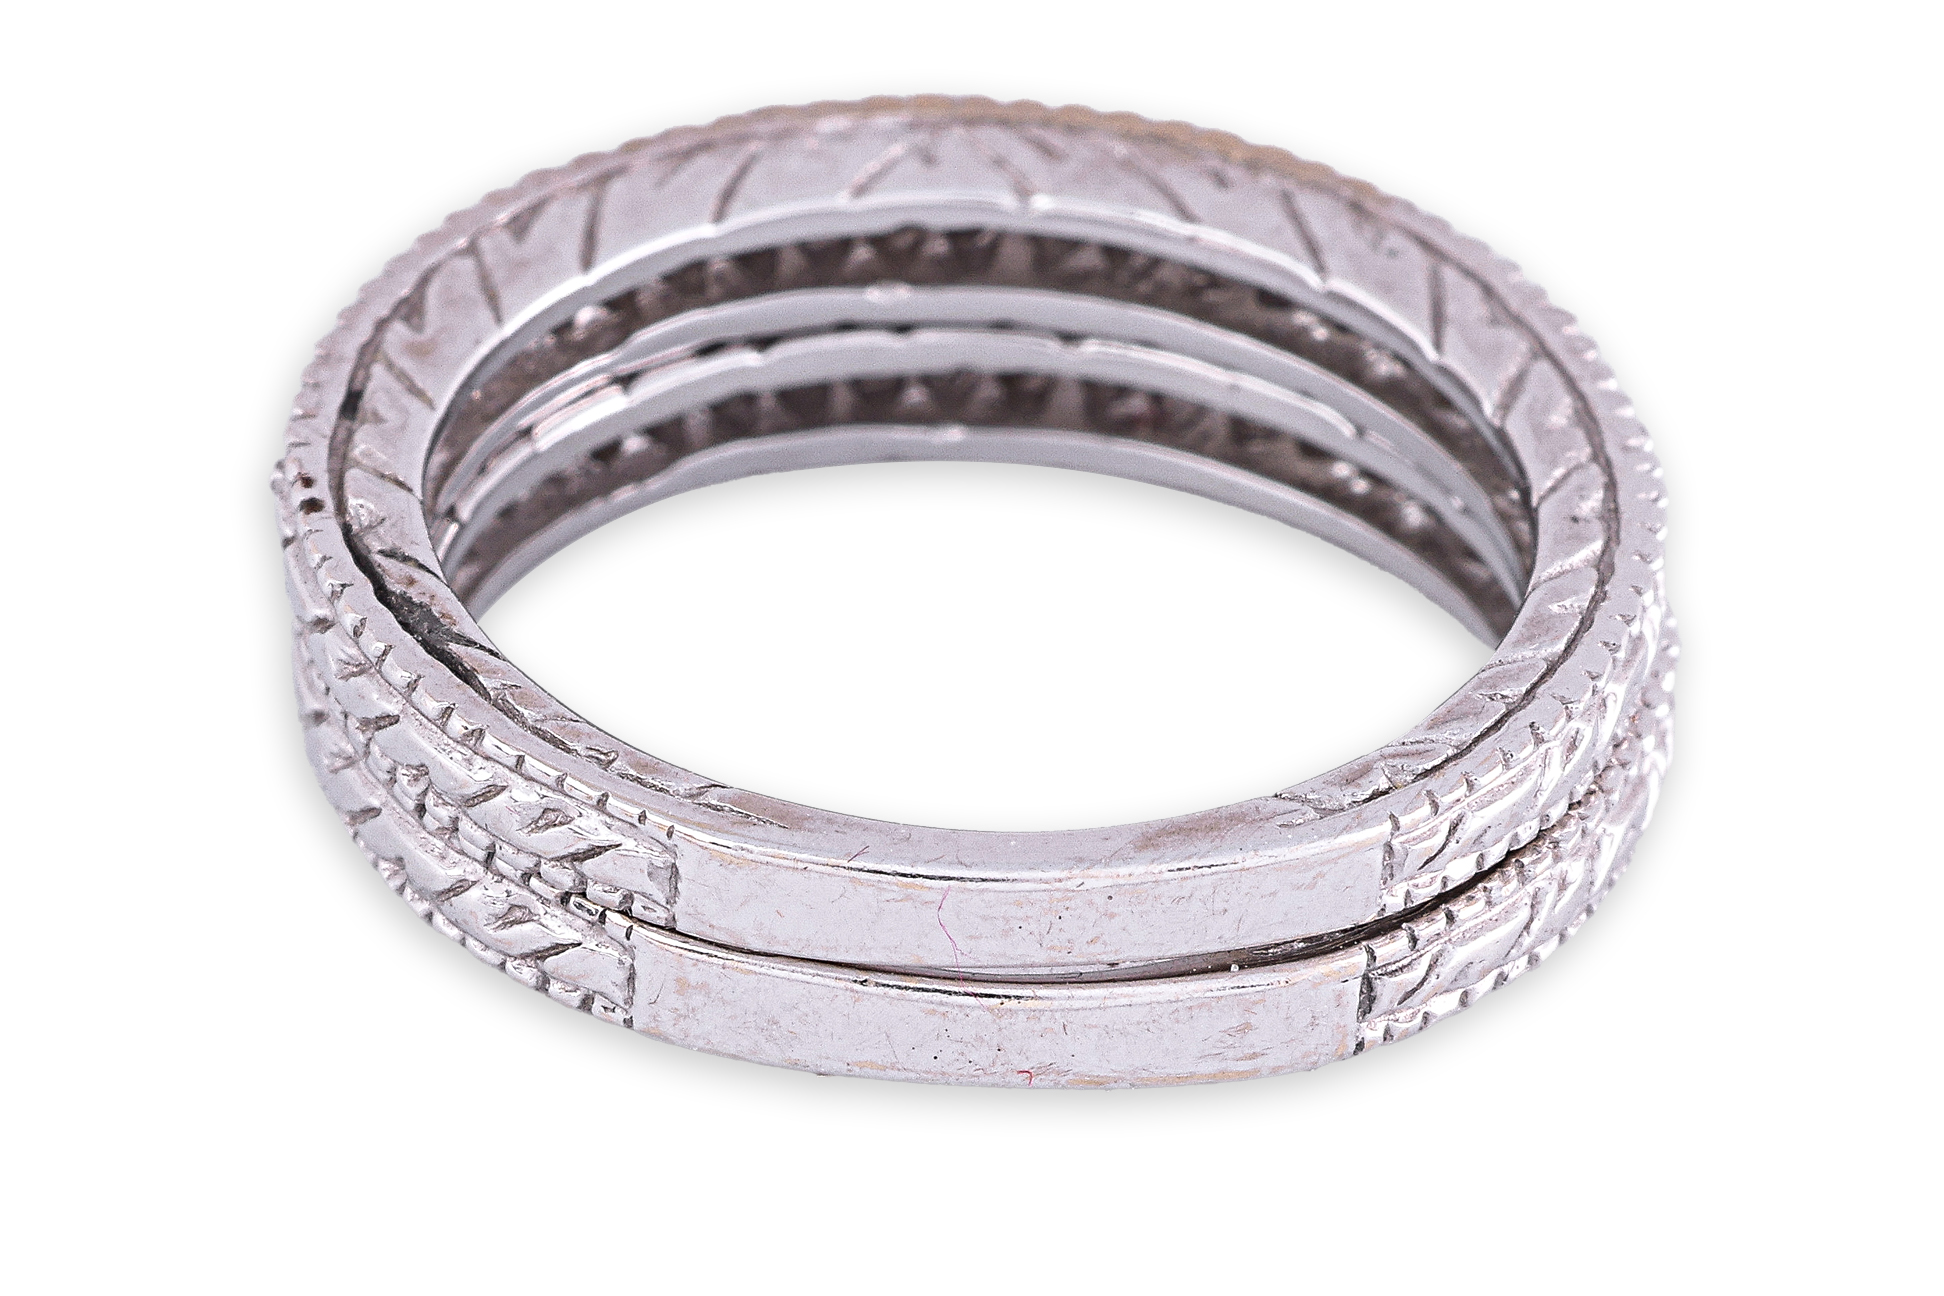 A PAIR OF STACKABLE DIAMOND HALF ETERNITY BANDS - Image 3 of 6